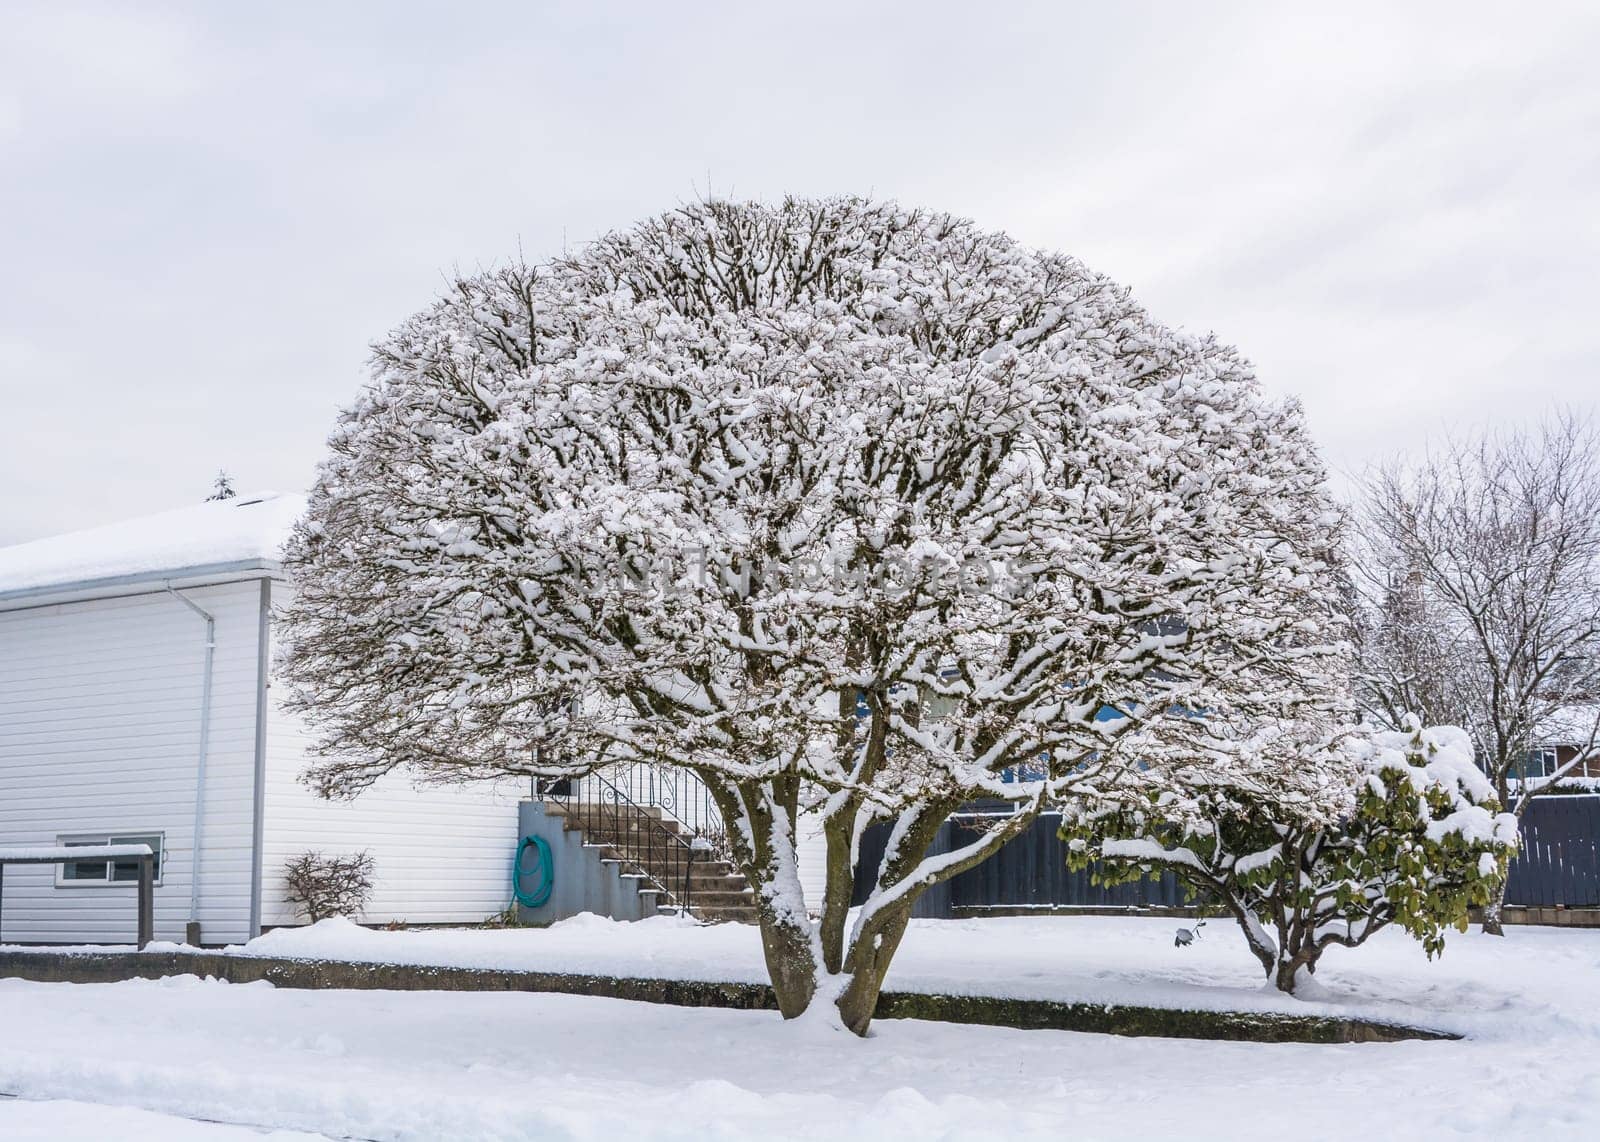 Big decorative tree in snow on front yard of residential house. by Imagenet